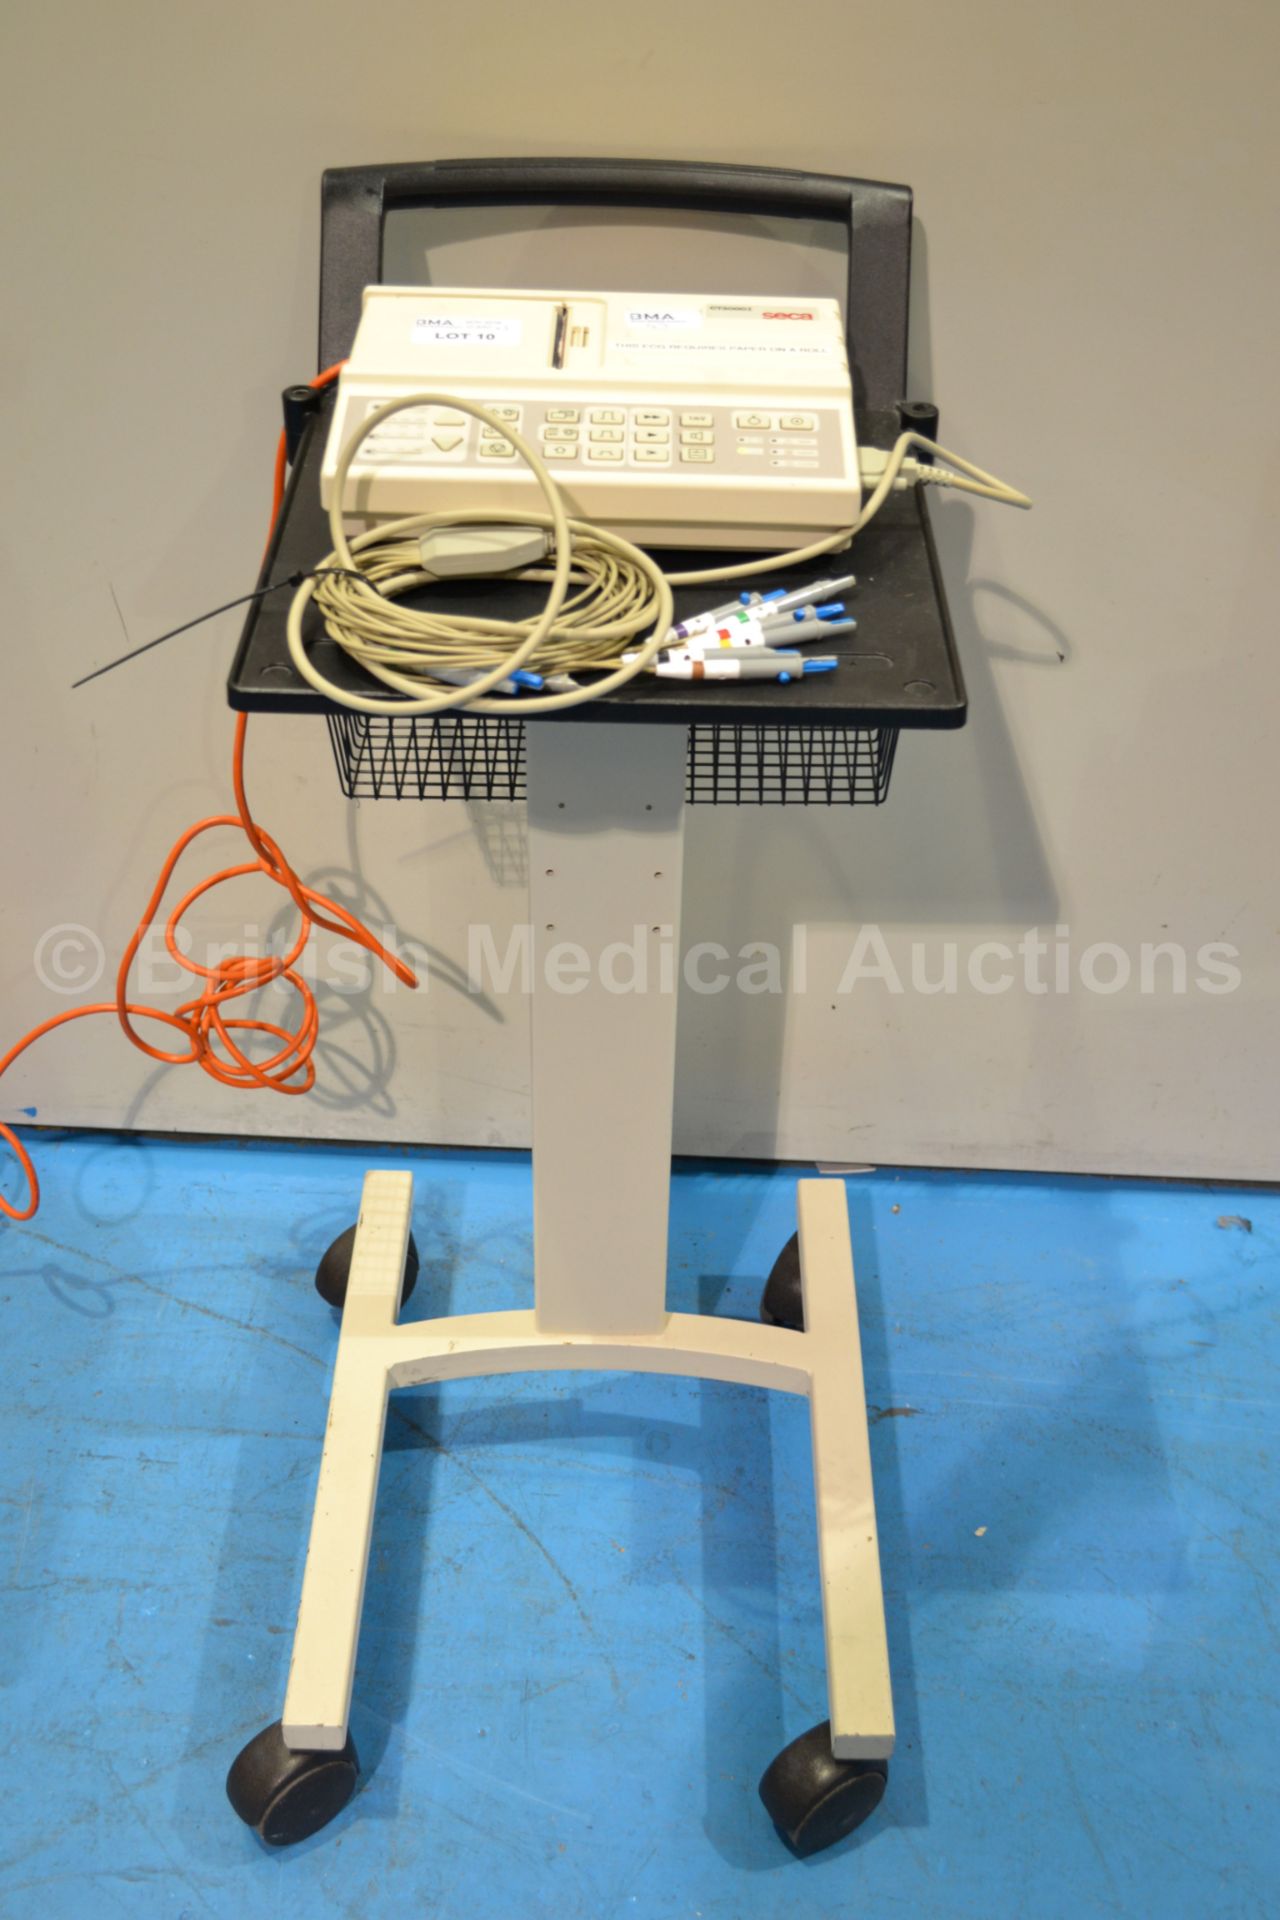 Seca CT3000I ECG Machine on Trolley with ECG Leads - Image 2 of 4